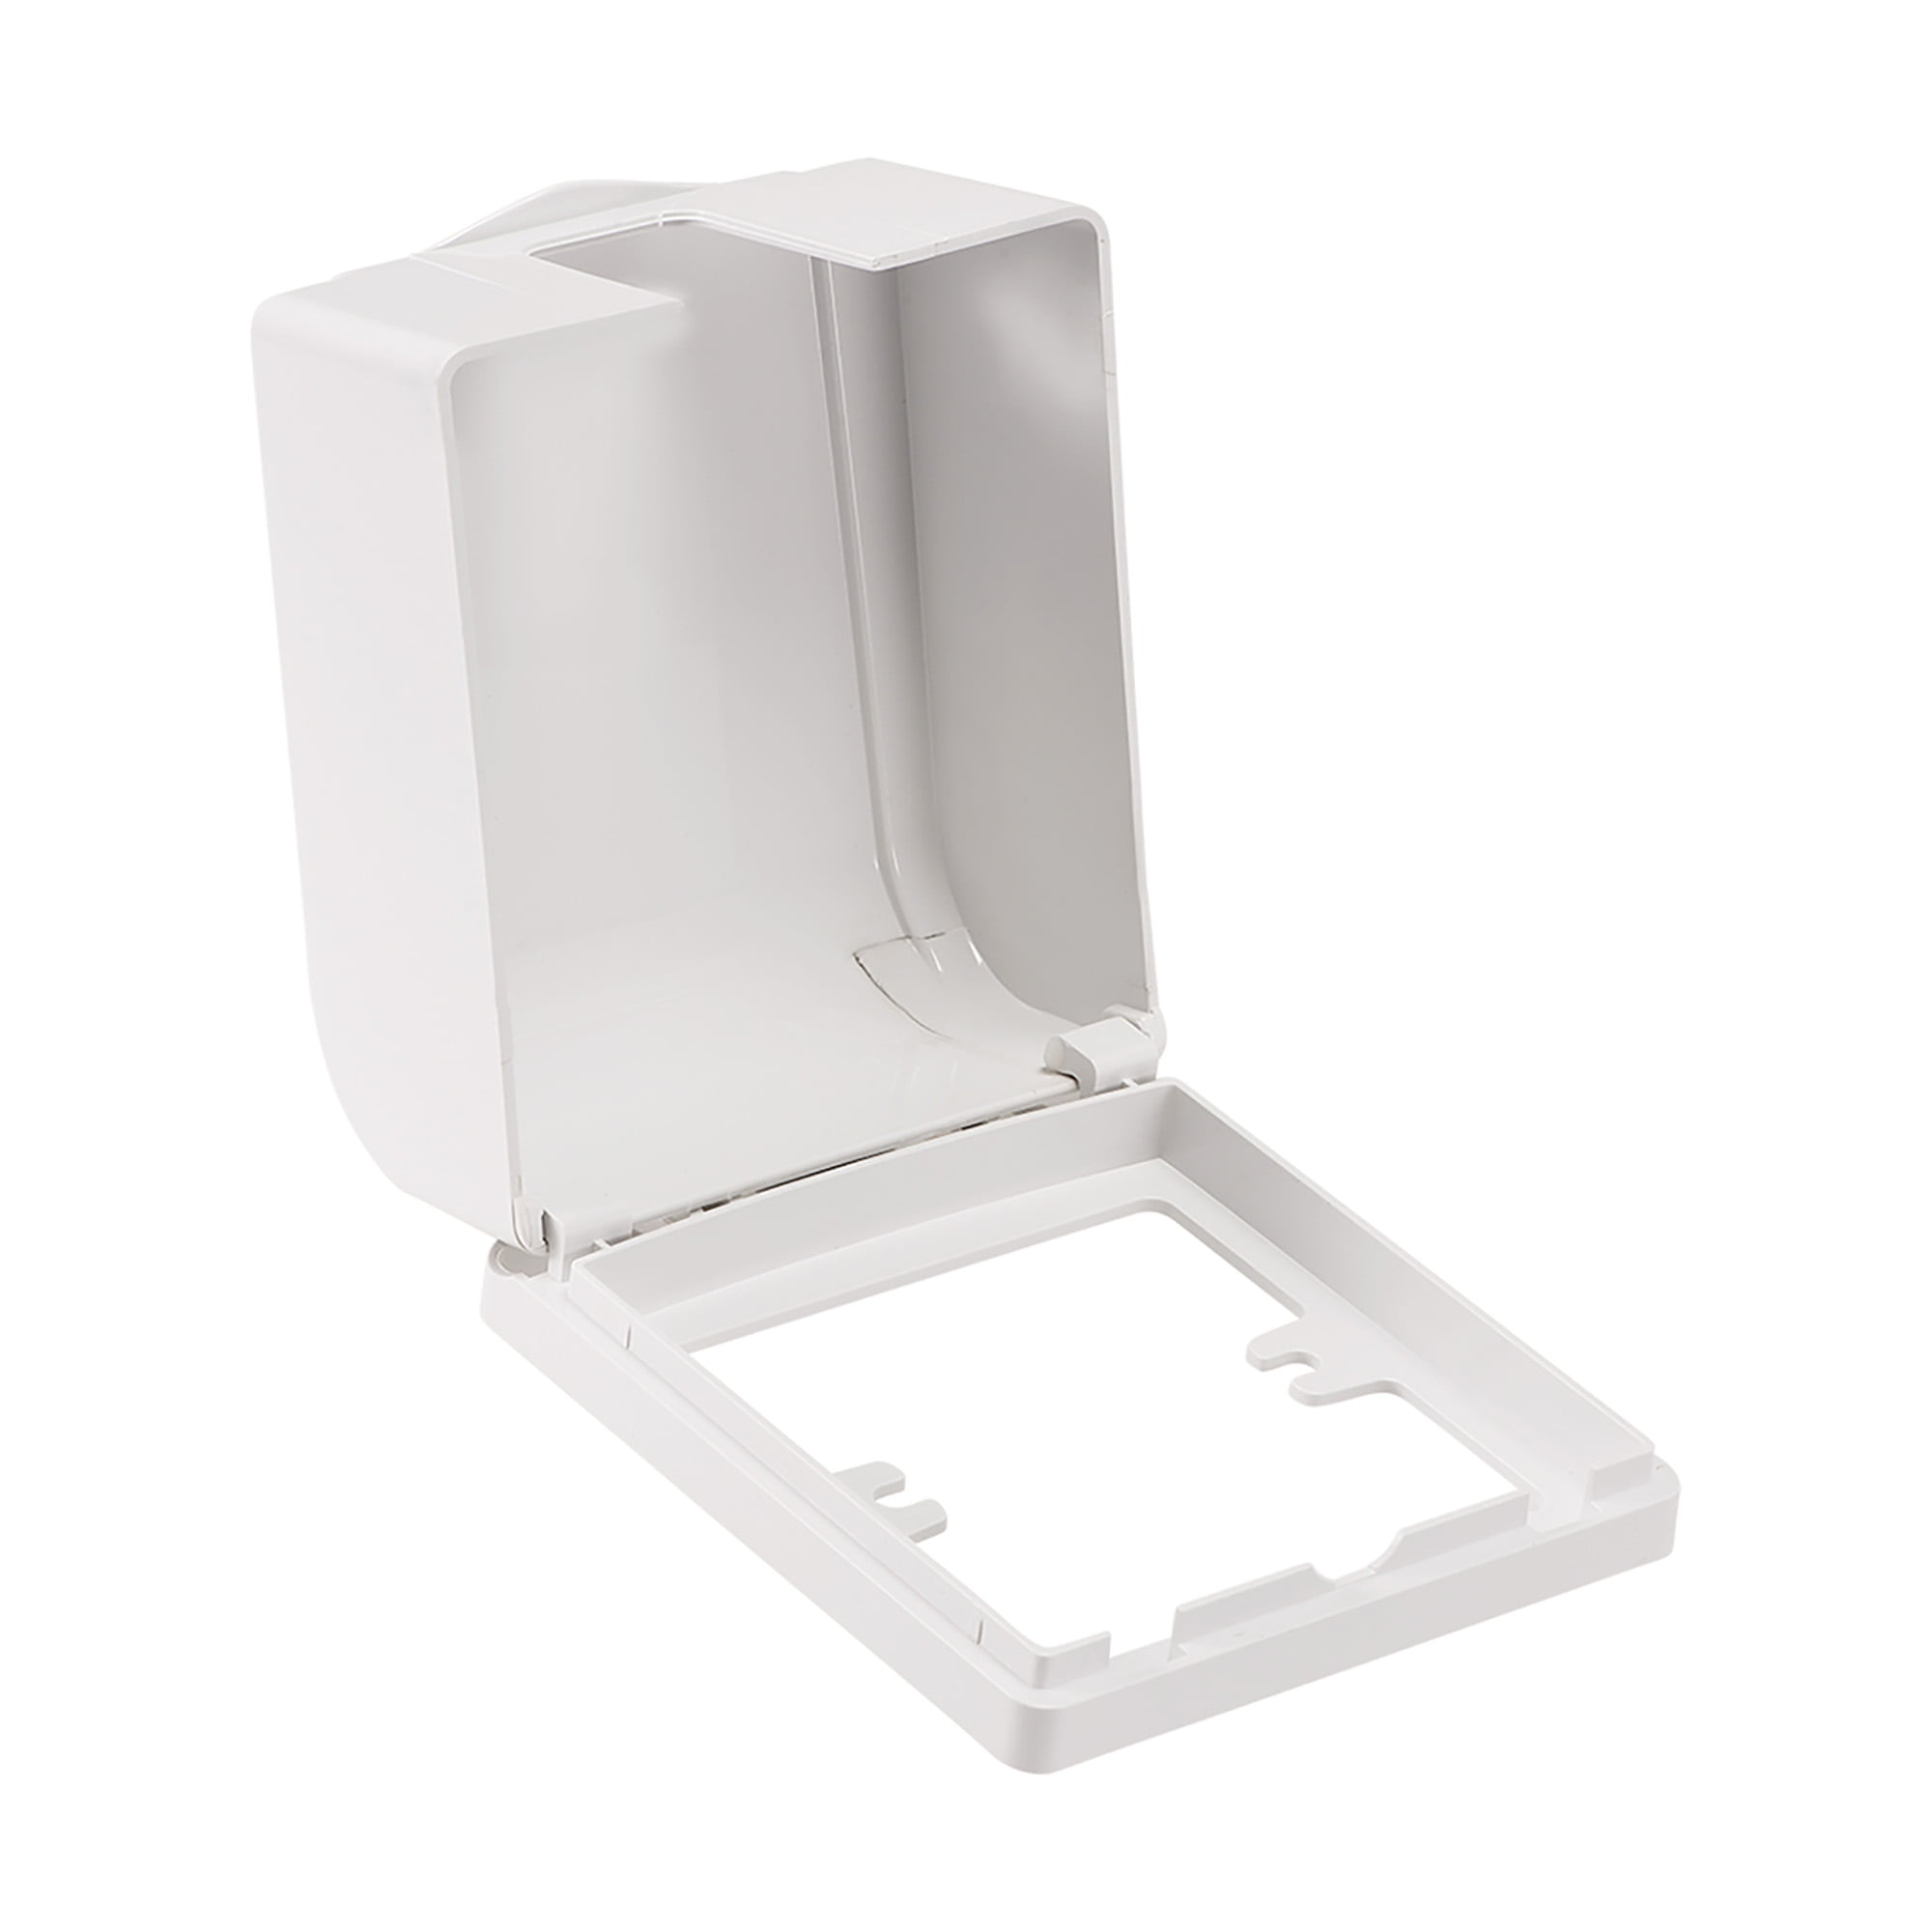 Weatherproof outlet cover Plug In use Receptacle Interior Protector Use 98x110x55mm White 